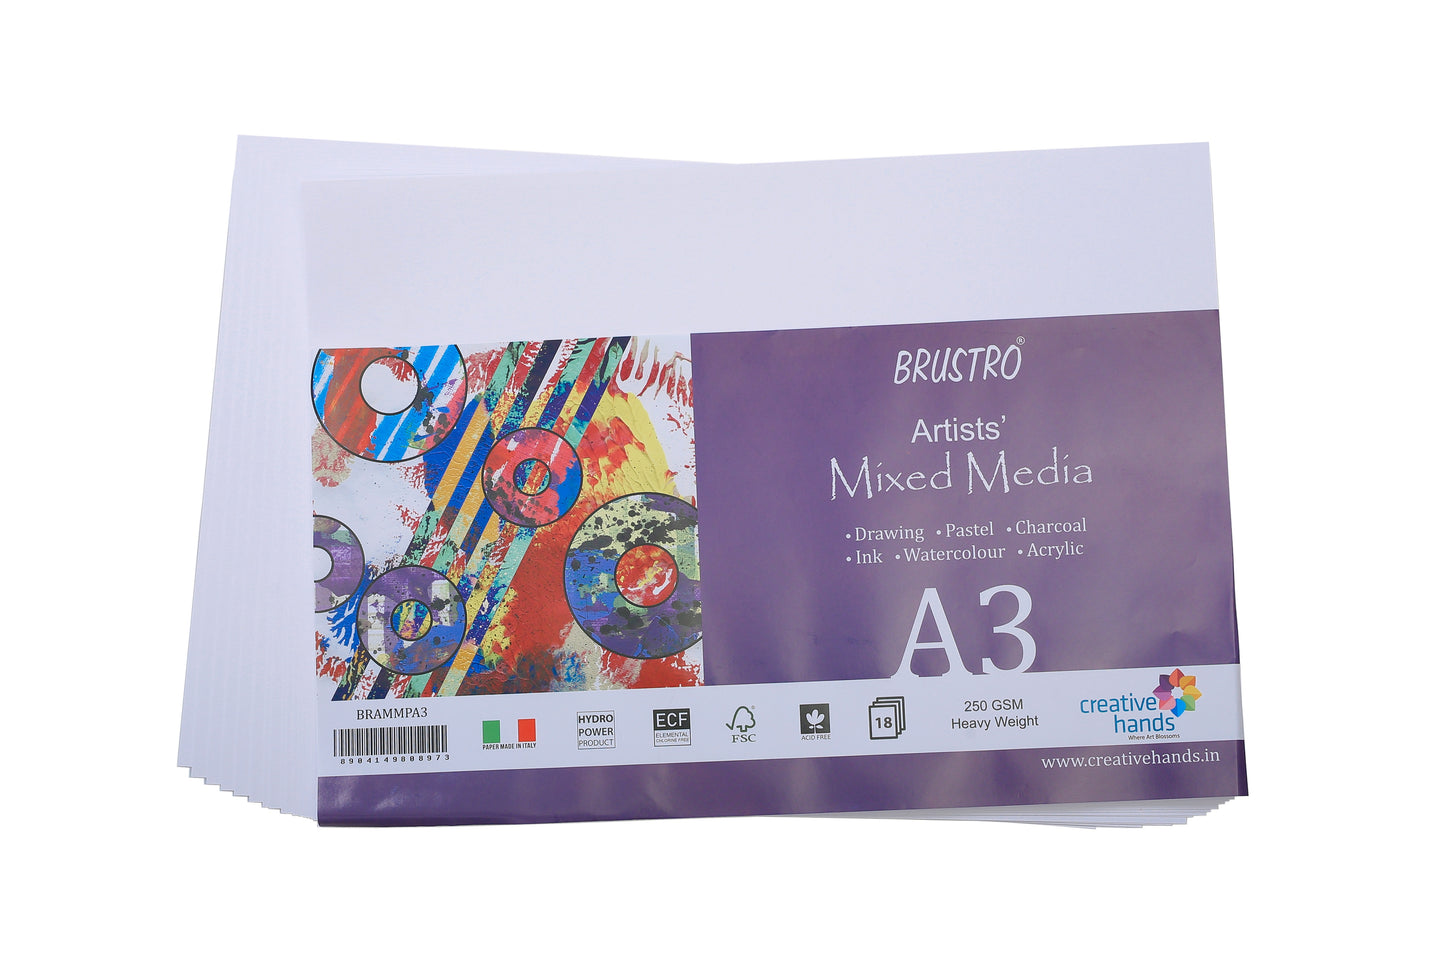 Brustro Artists Mixed Media Paper 250 GSM Size - A3, 18 Sheets